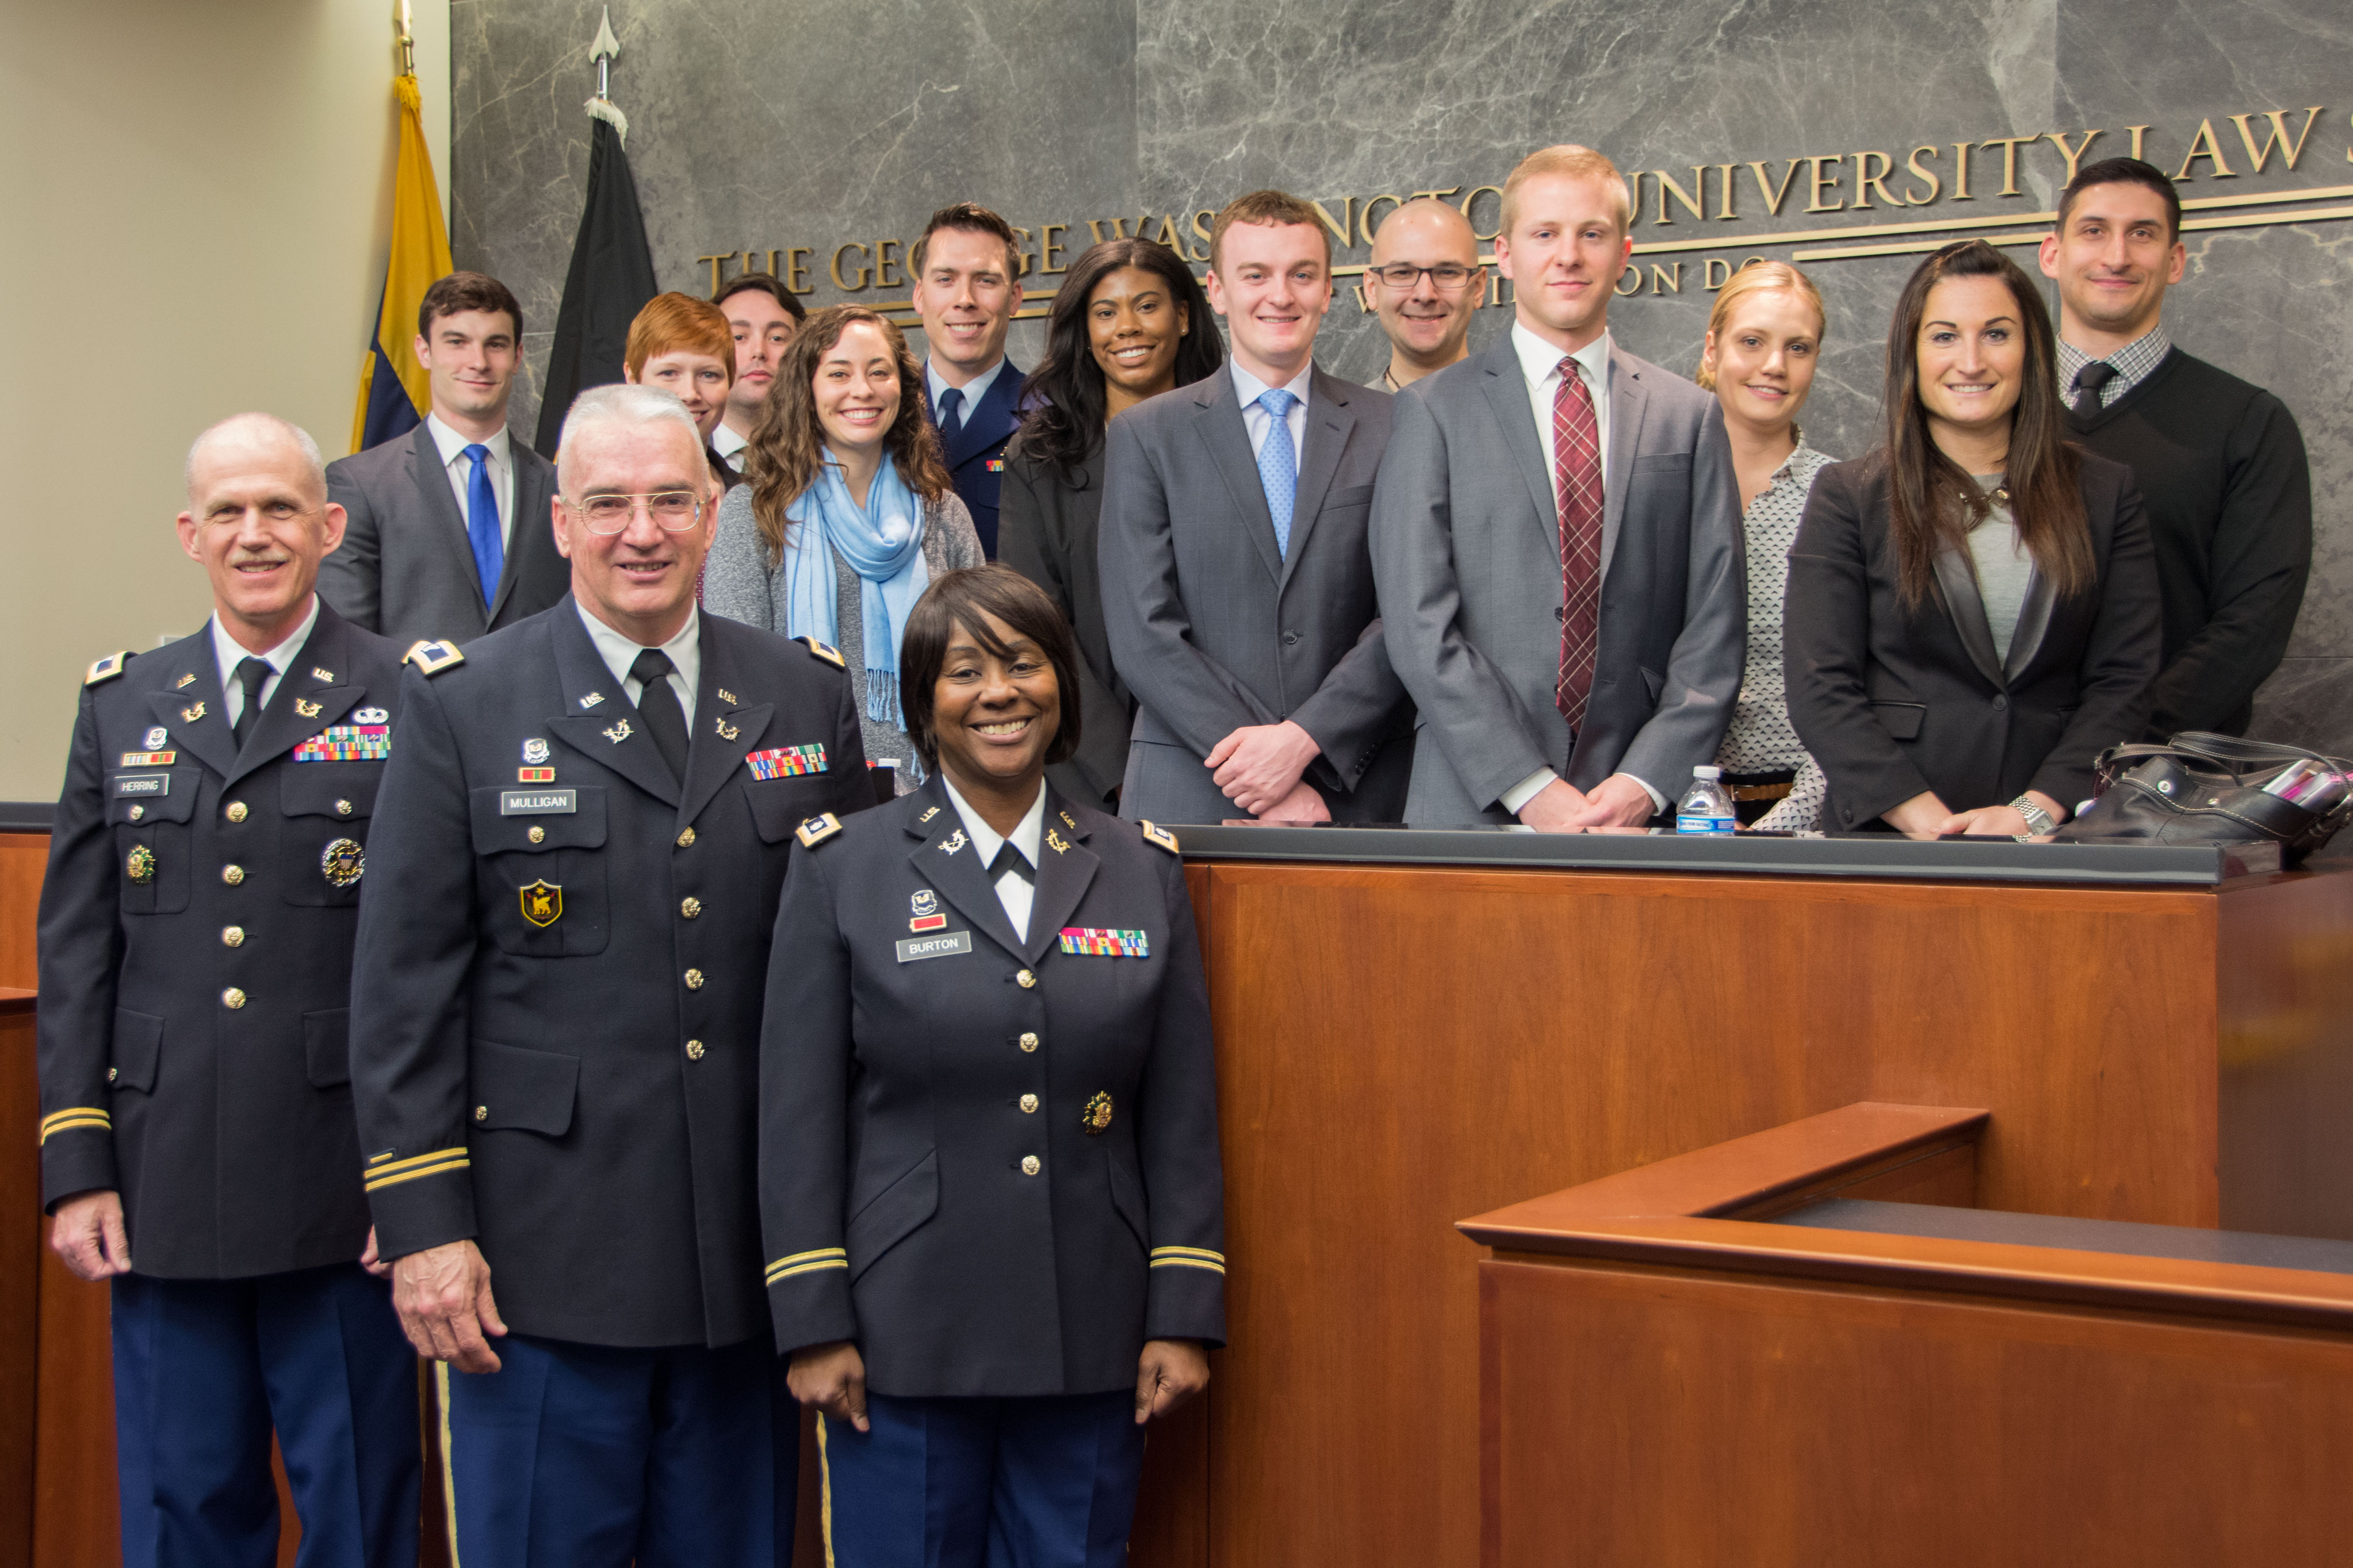 Photo of judges of the U.S. Army Court of Criminal Appeals with GW Law students.